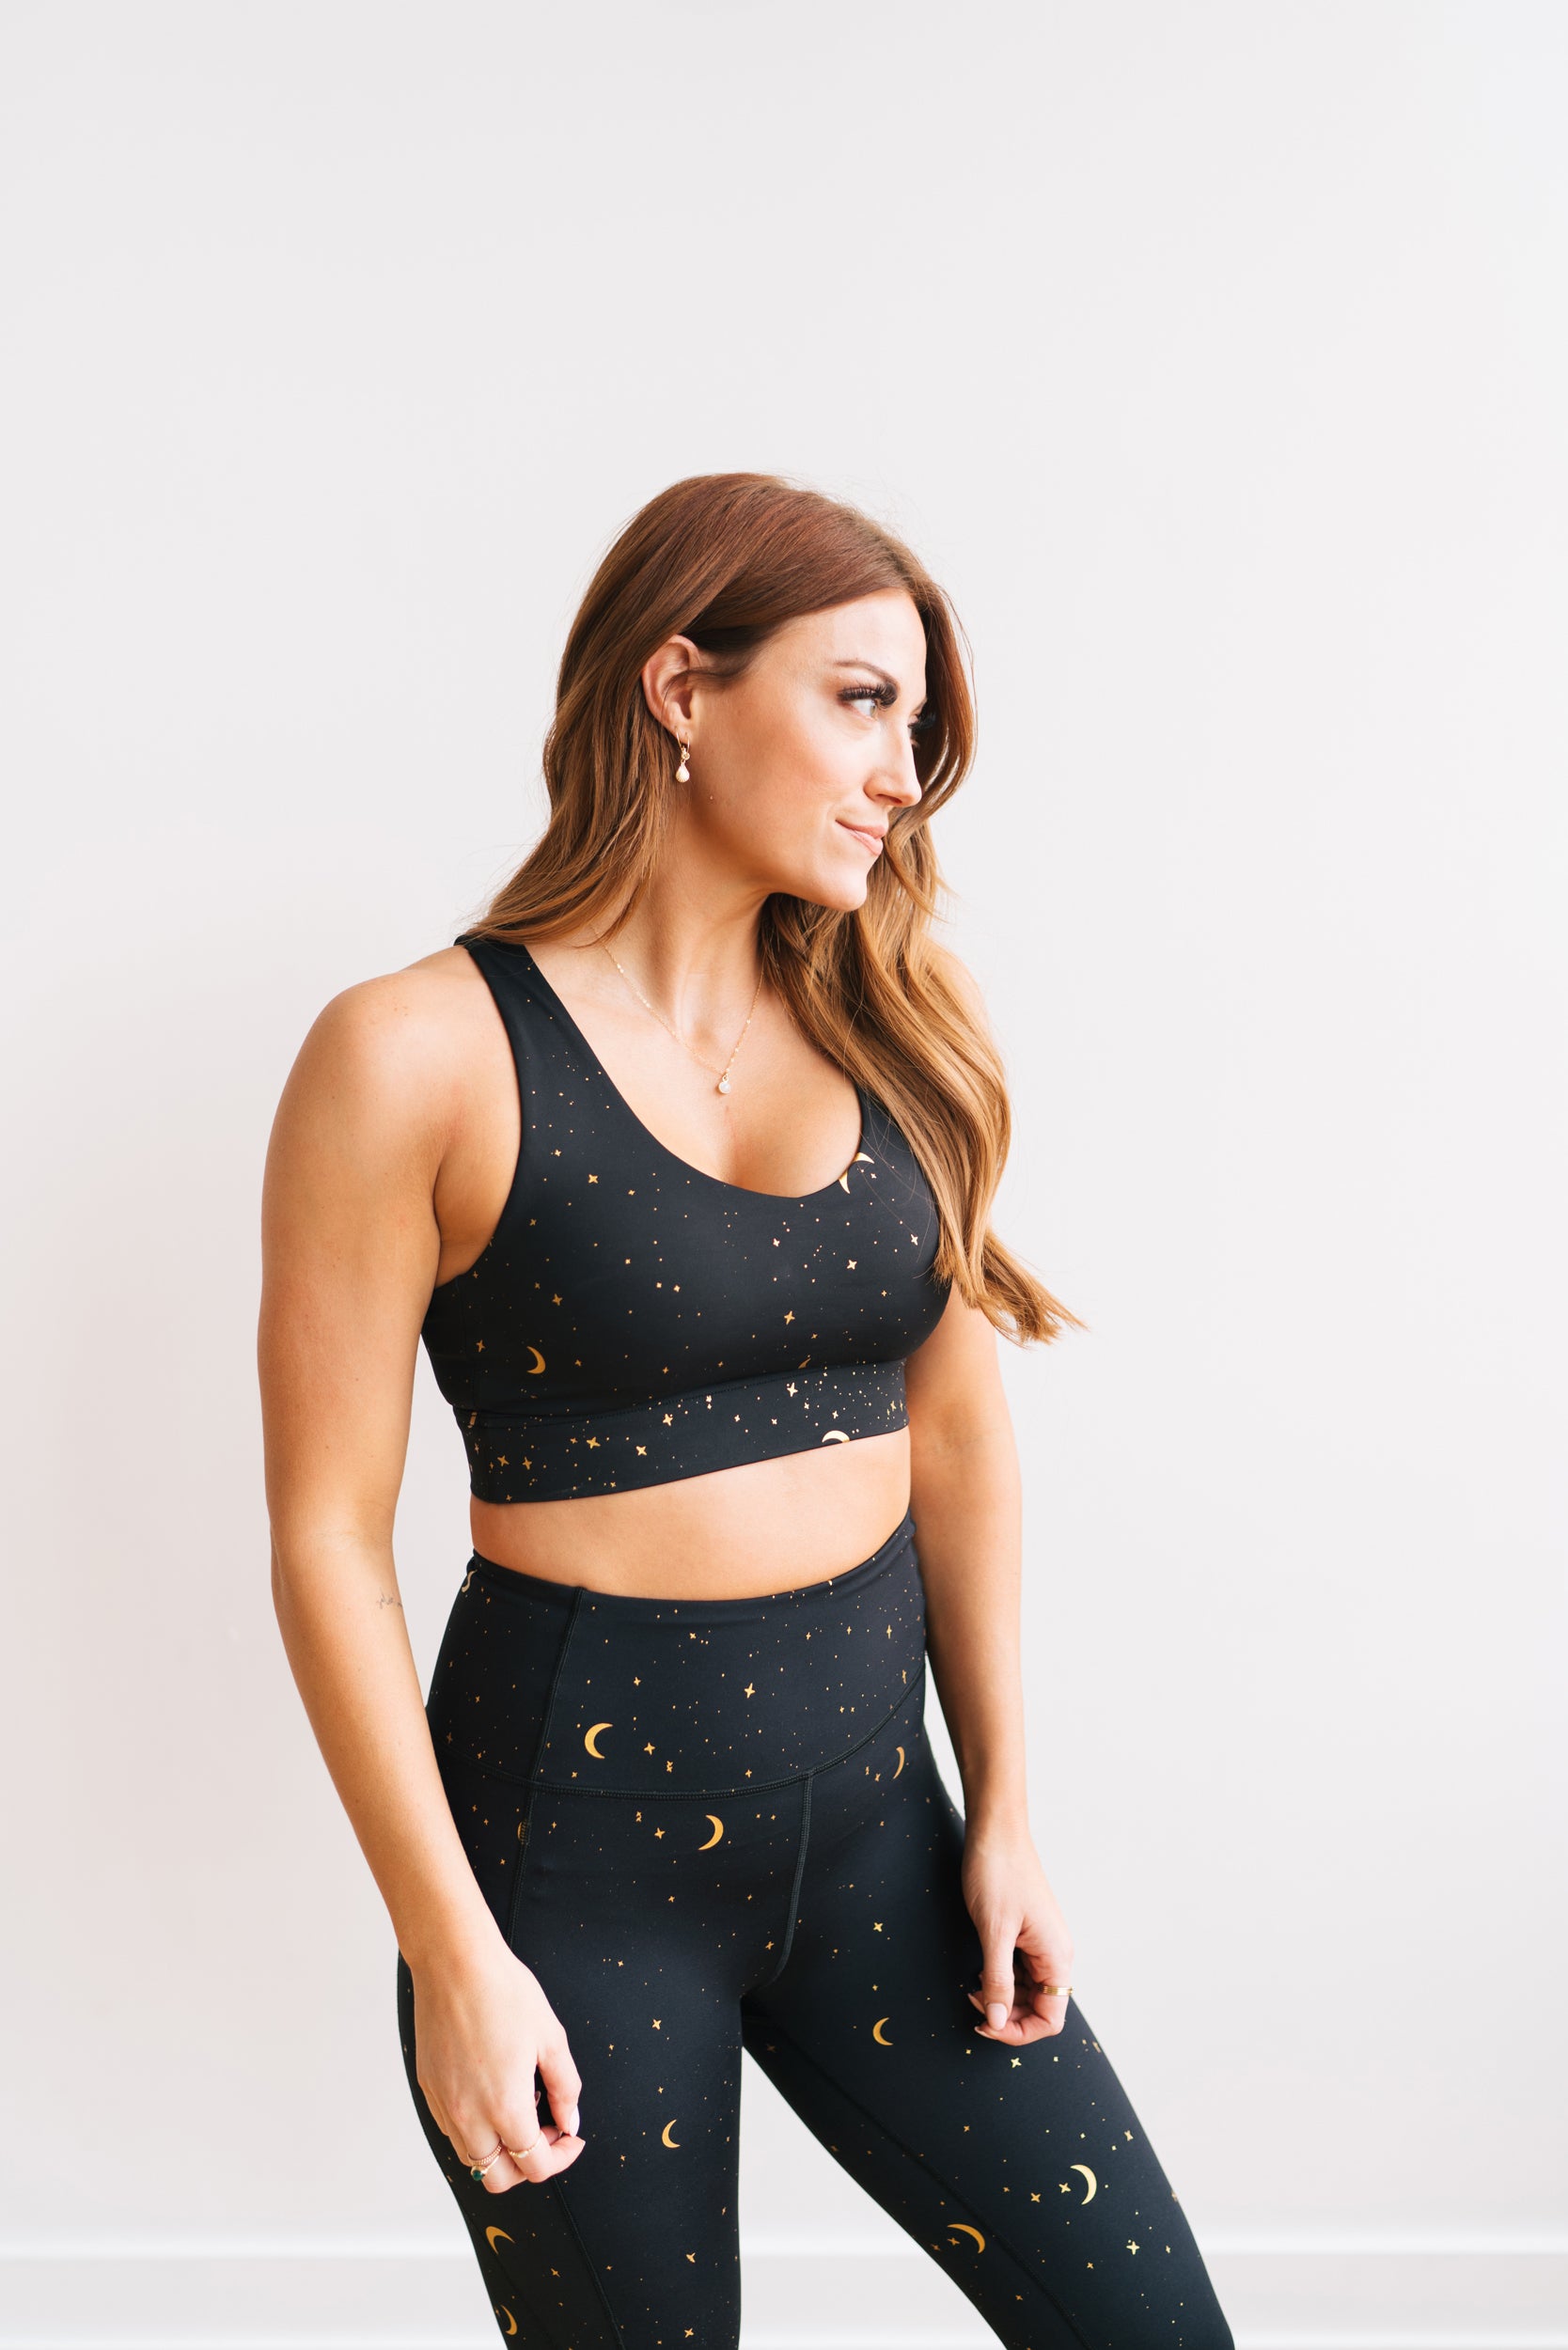 Moon Outfit: Leggings and Sports Bra - from XS to XL!Lili Warrior